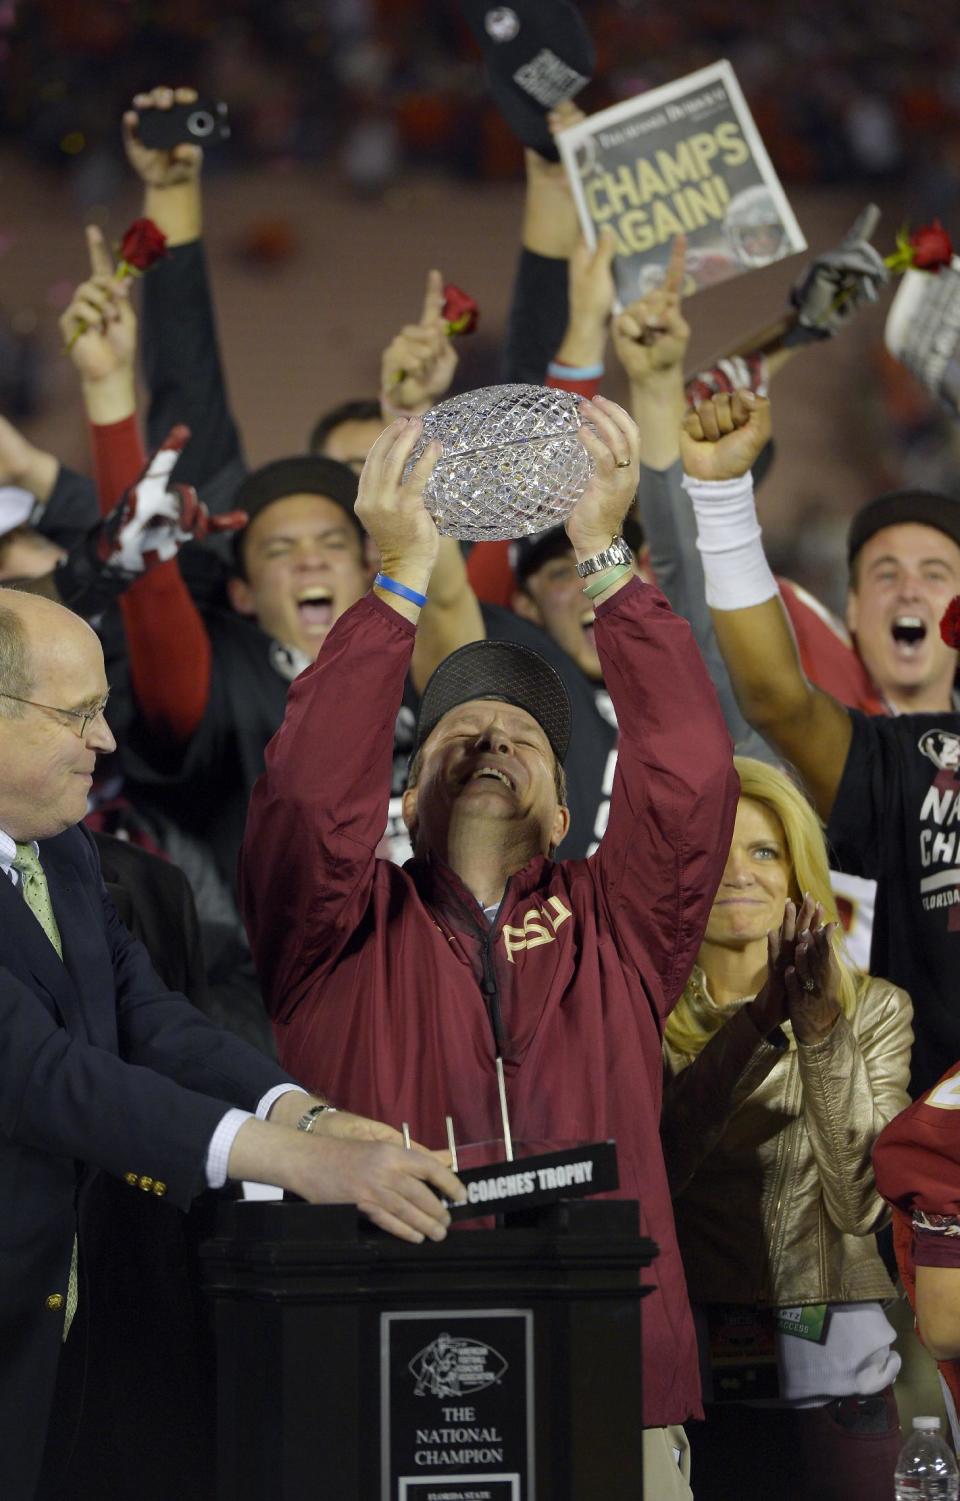 Florida State head coach Jimbo Fisher with The Coaches' Trophy after the NCAA BCS National Championship college football game against Auburn Monday, Jan. 6, 2014, in Pasadena, Calif. Florida State won 34-31. (AP Photo/Mark J. Terrill)